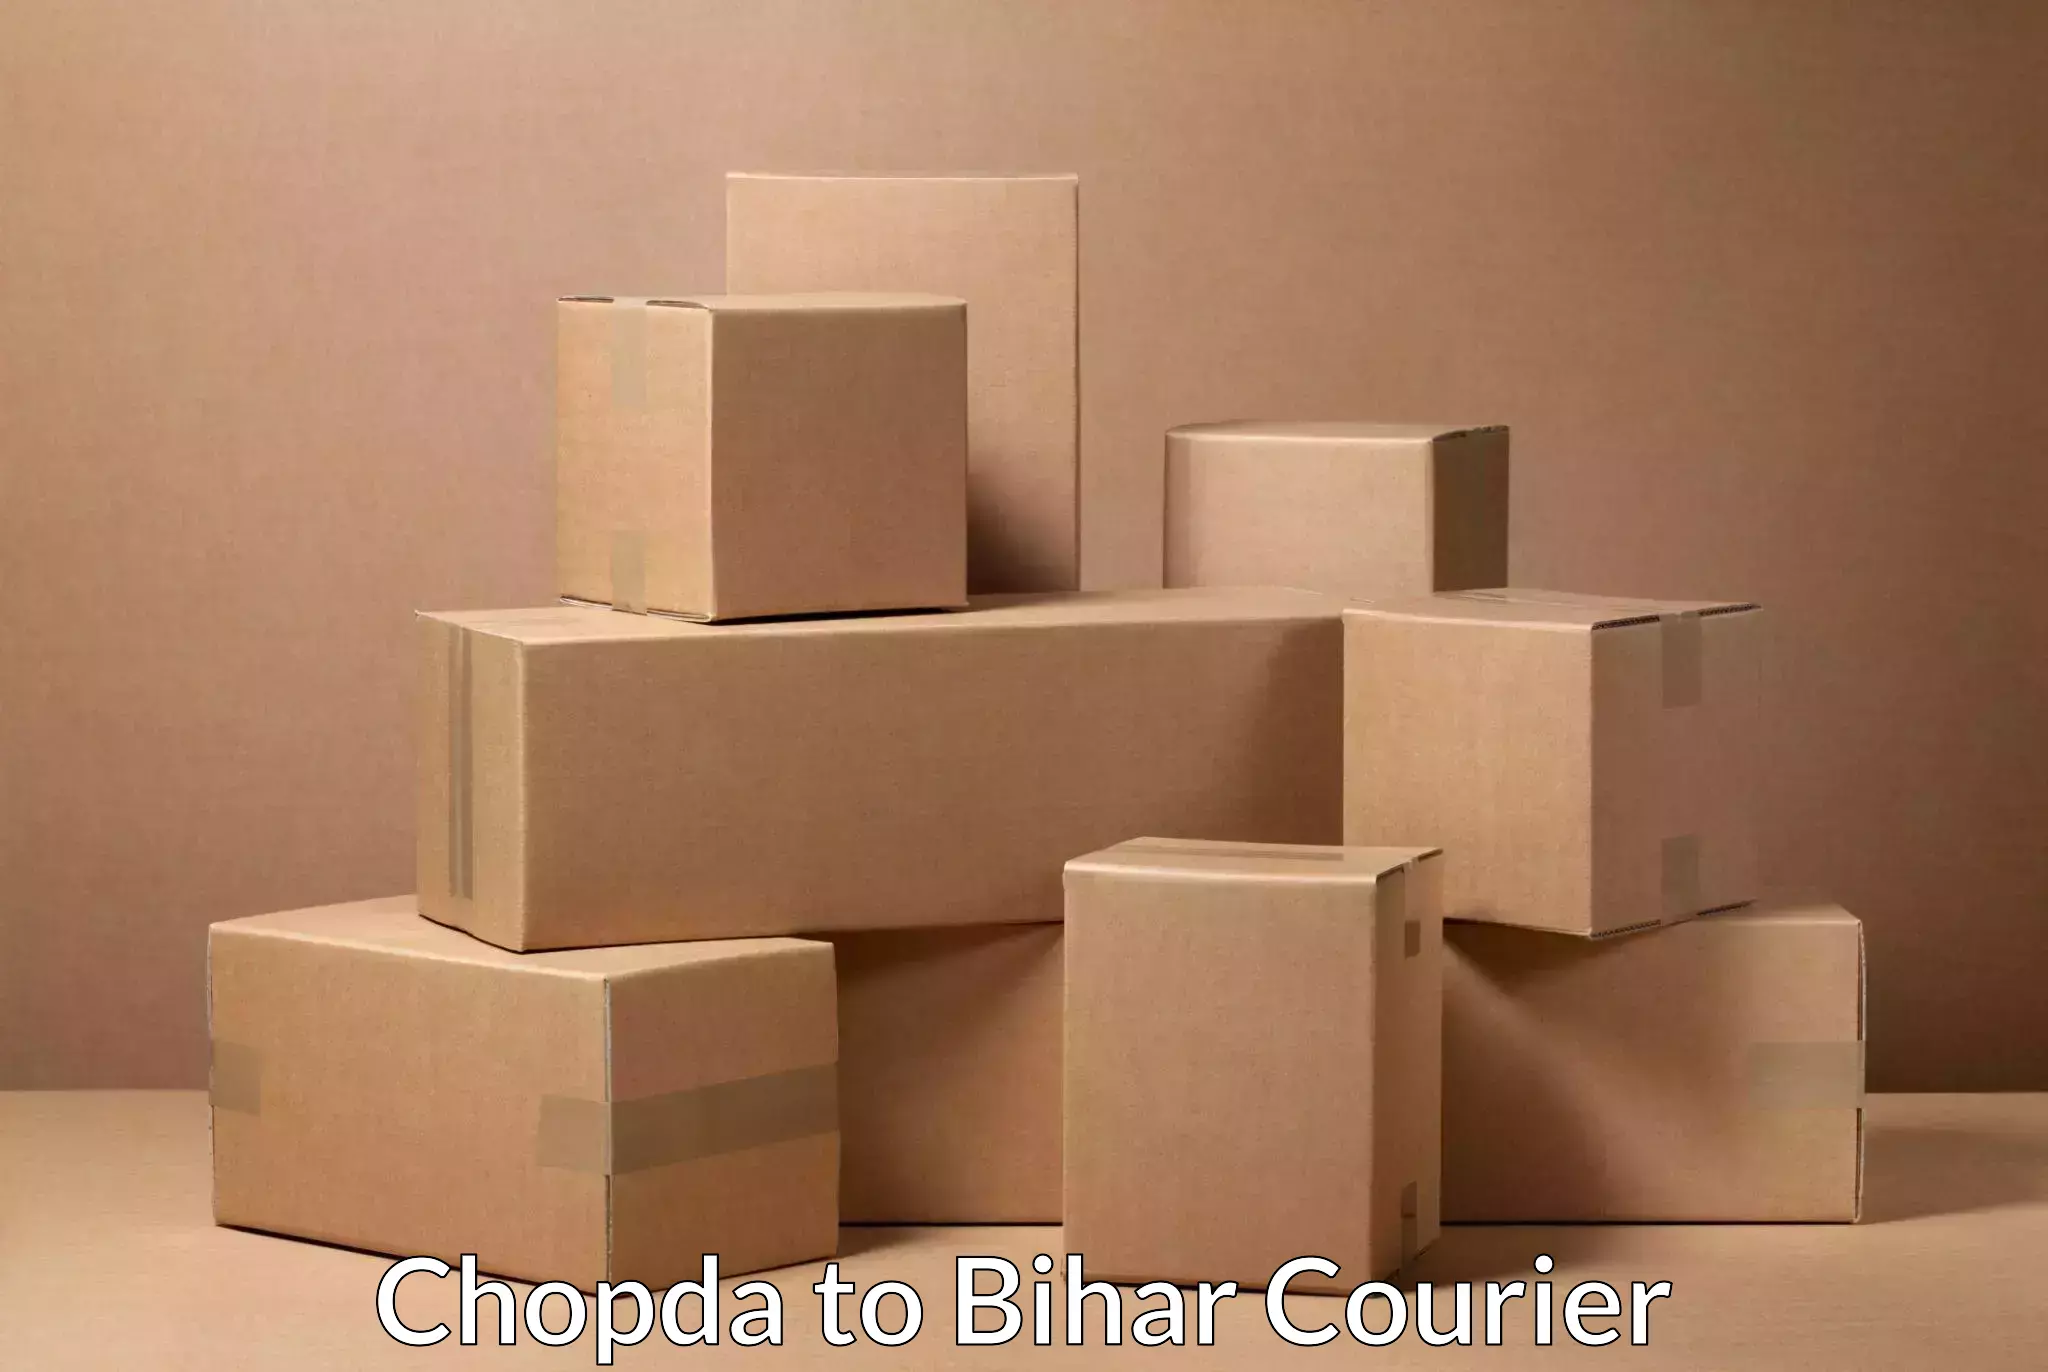 Online package tracking Chopda to Bhojpur